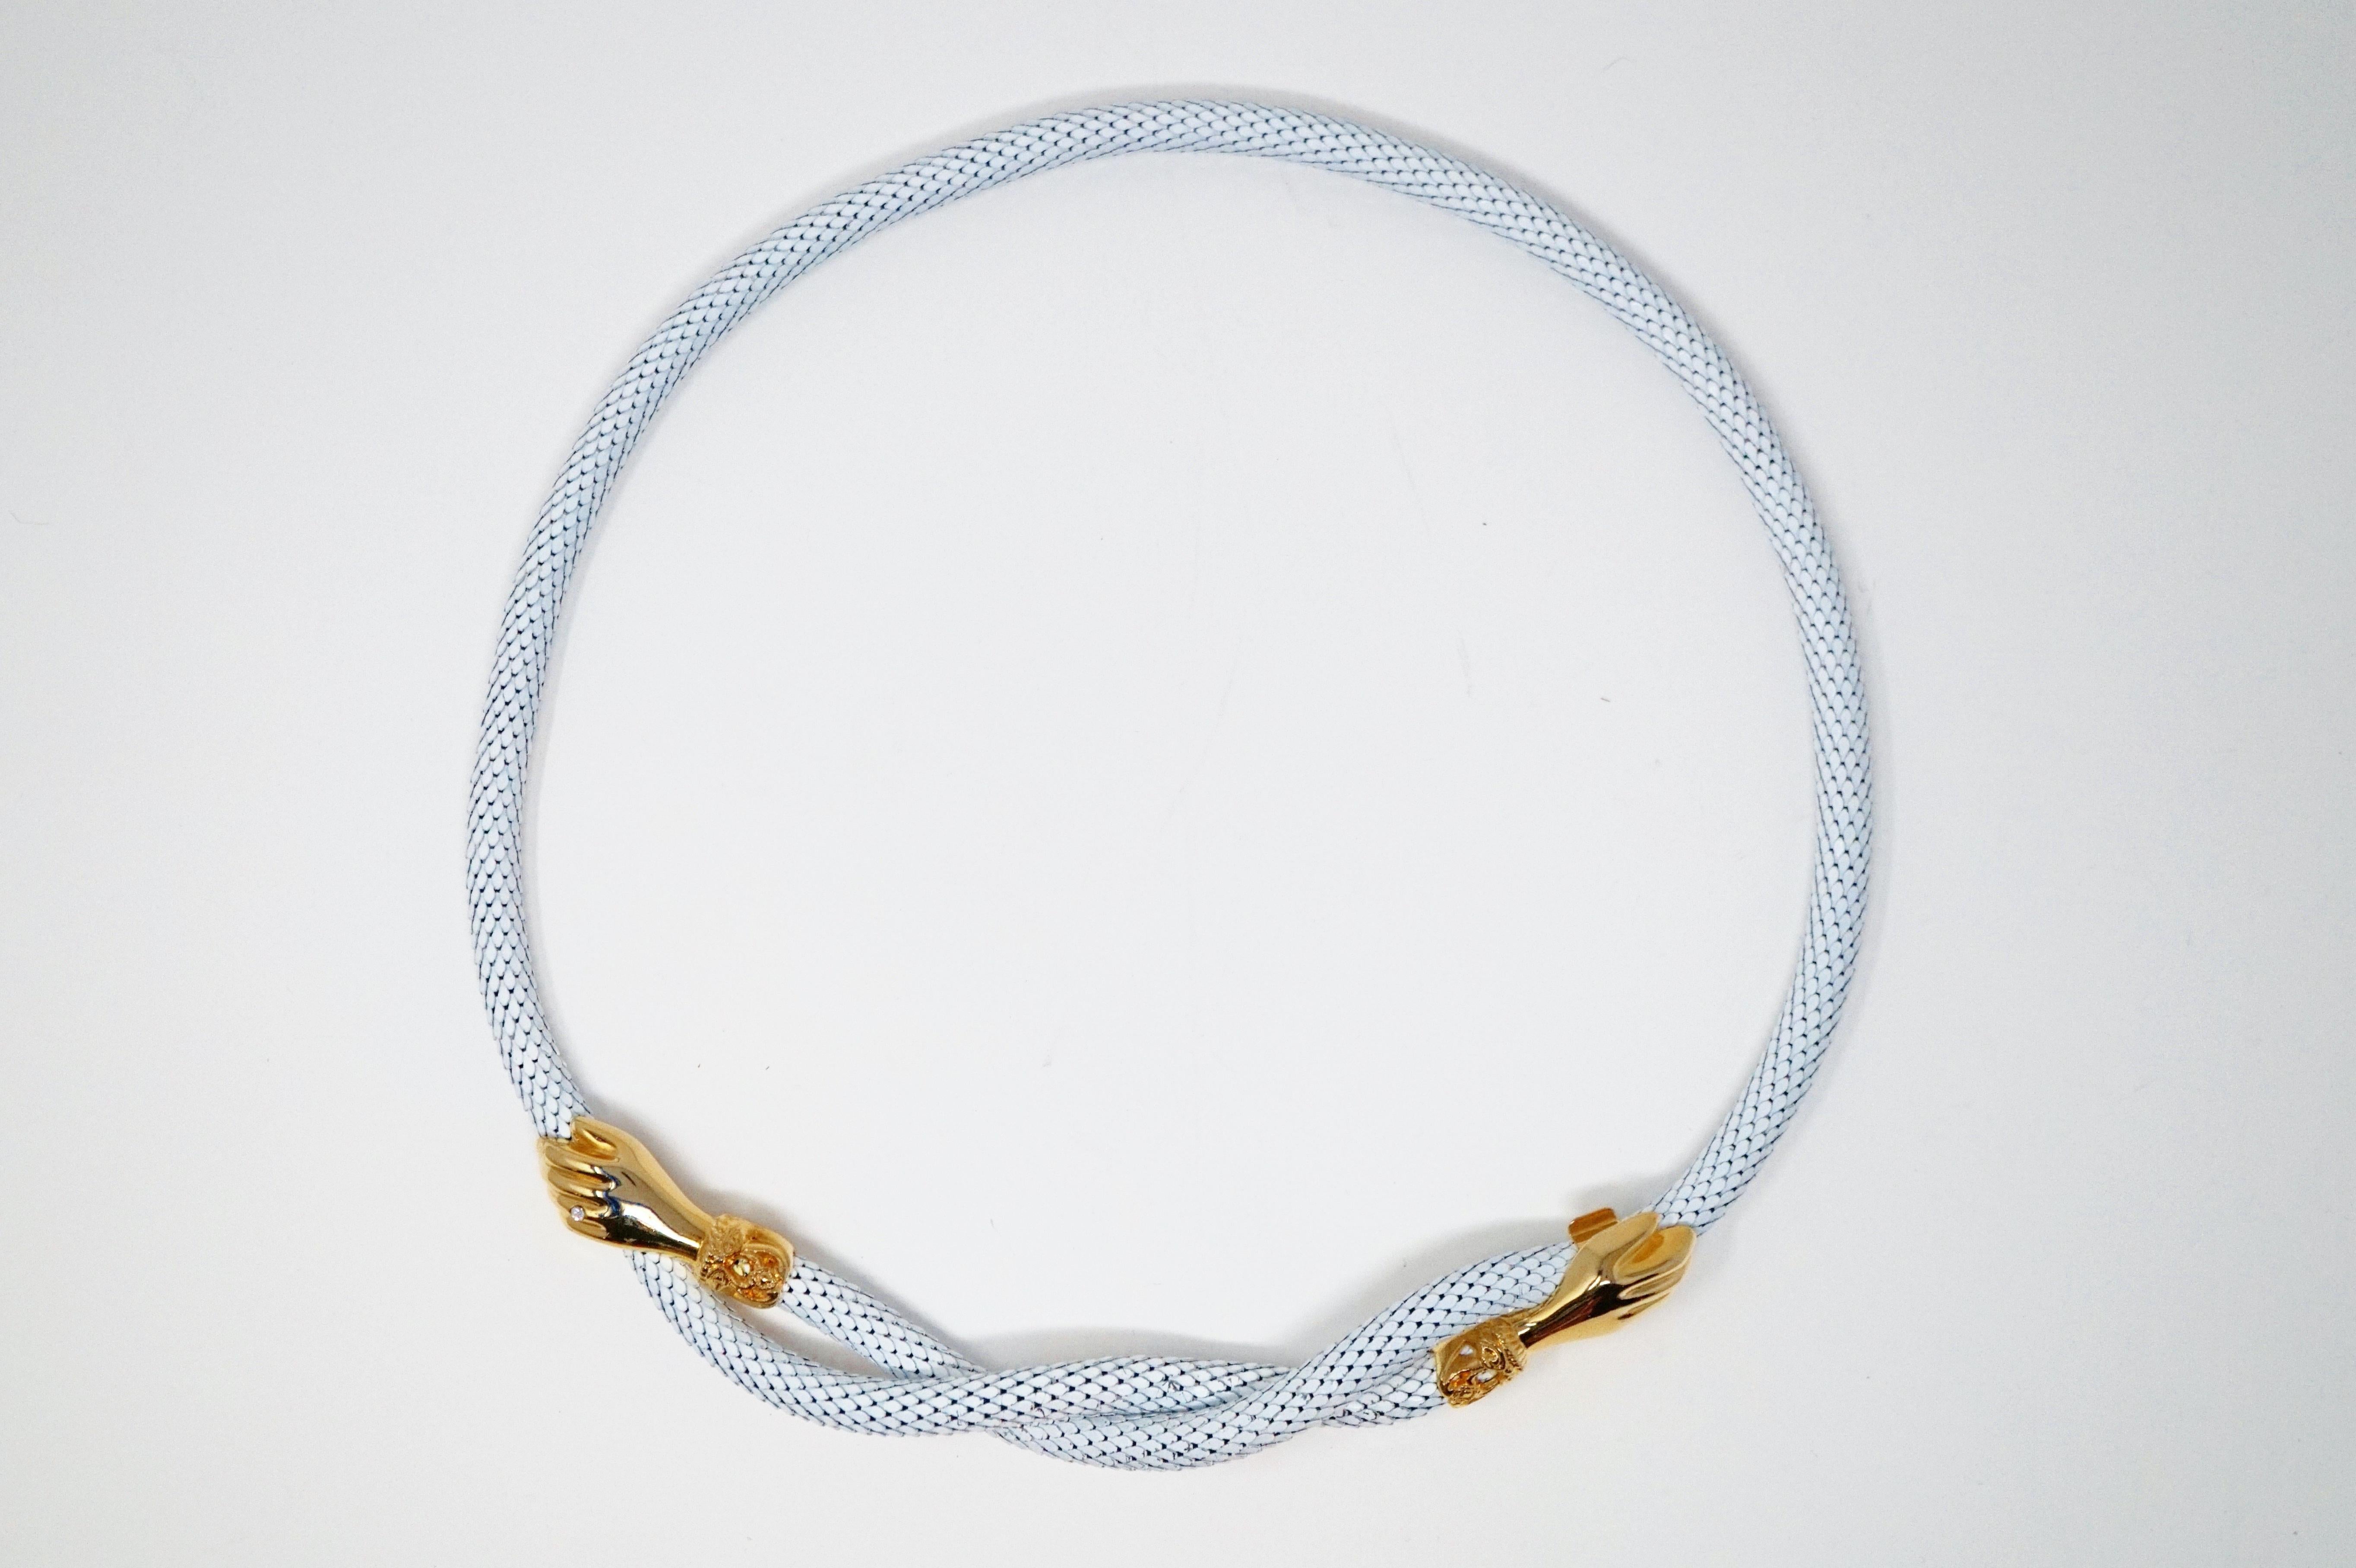 1980s White Mesh Belt or Necklace with Gold Hands by DL Auld Co, Signed 3